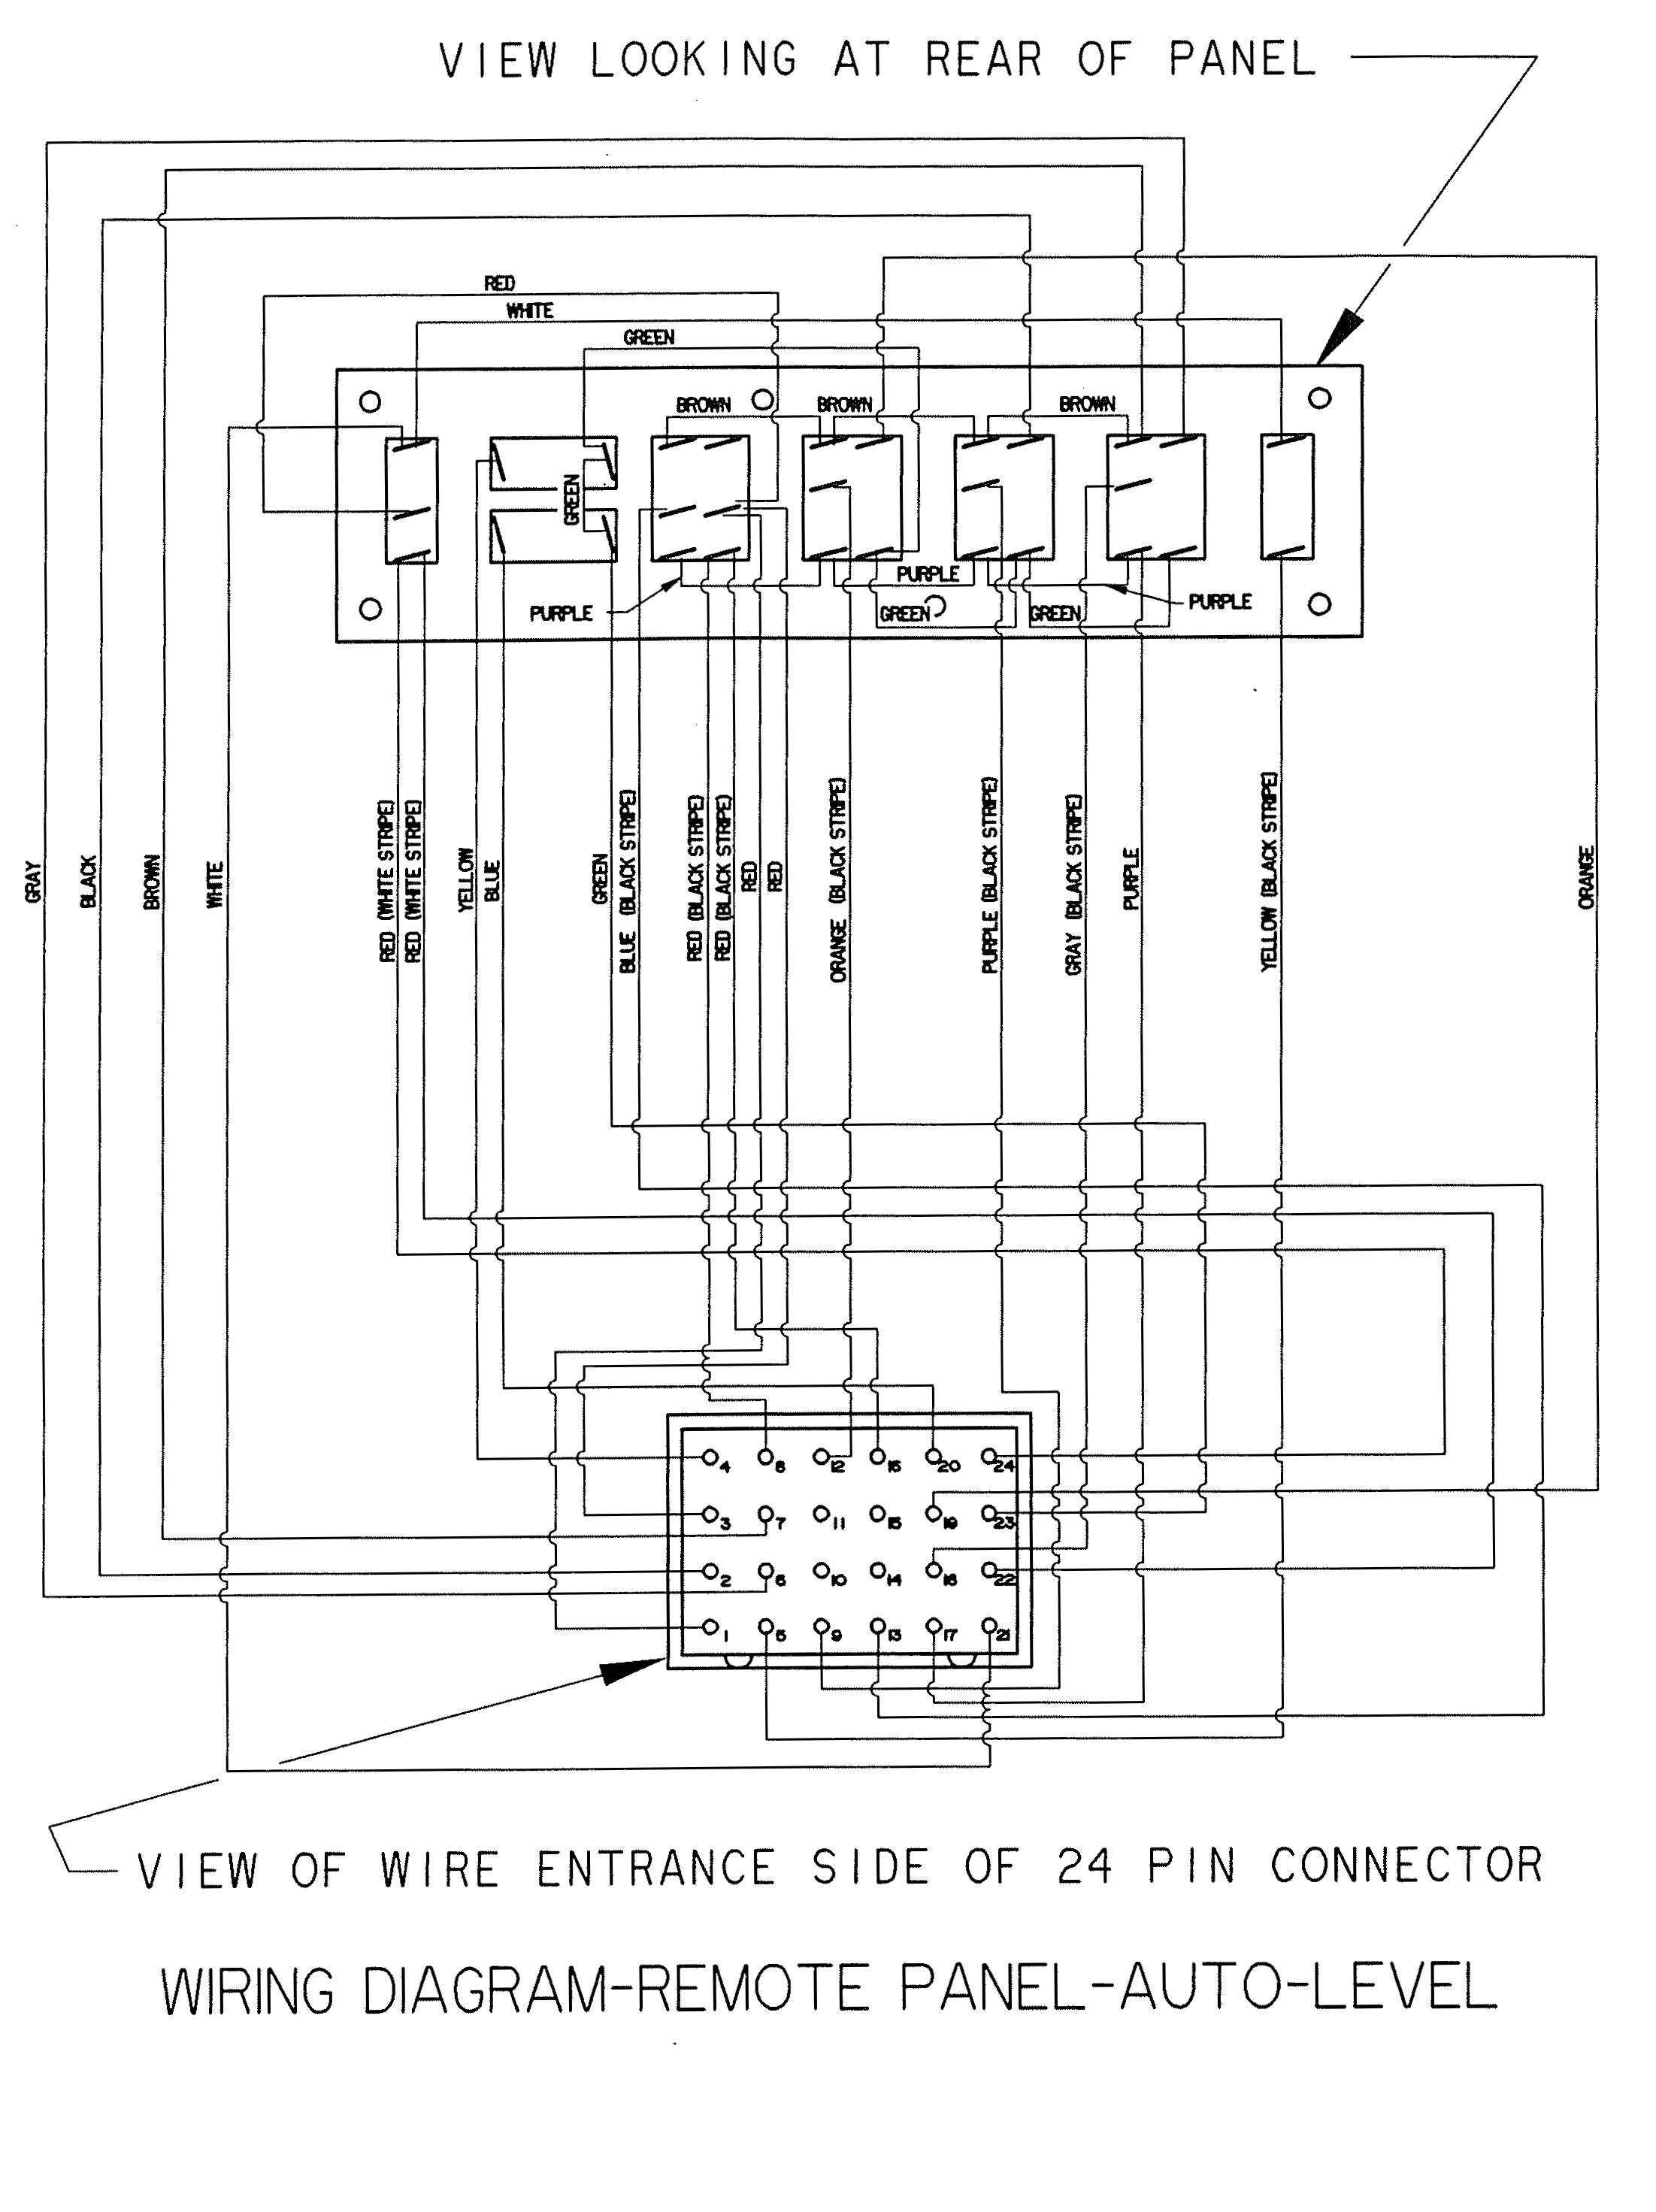 orignal_auto_wiring_remote_panel.png